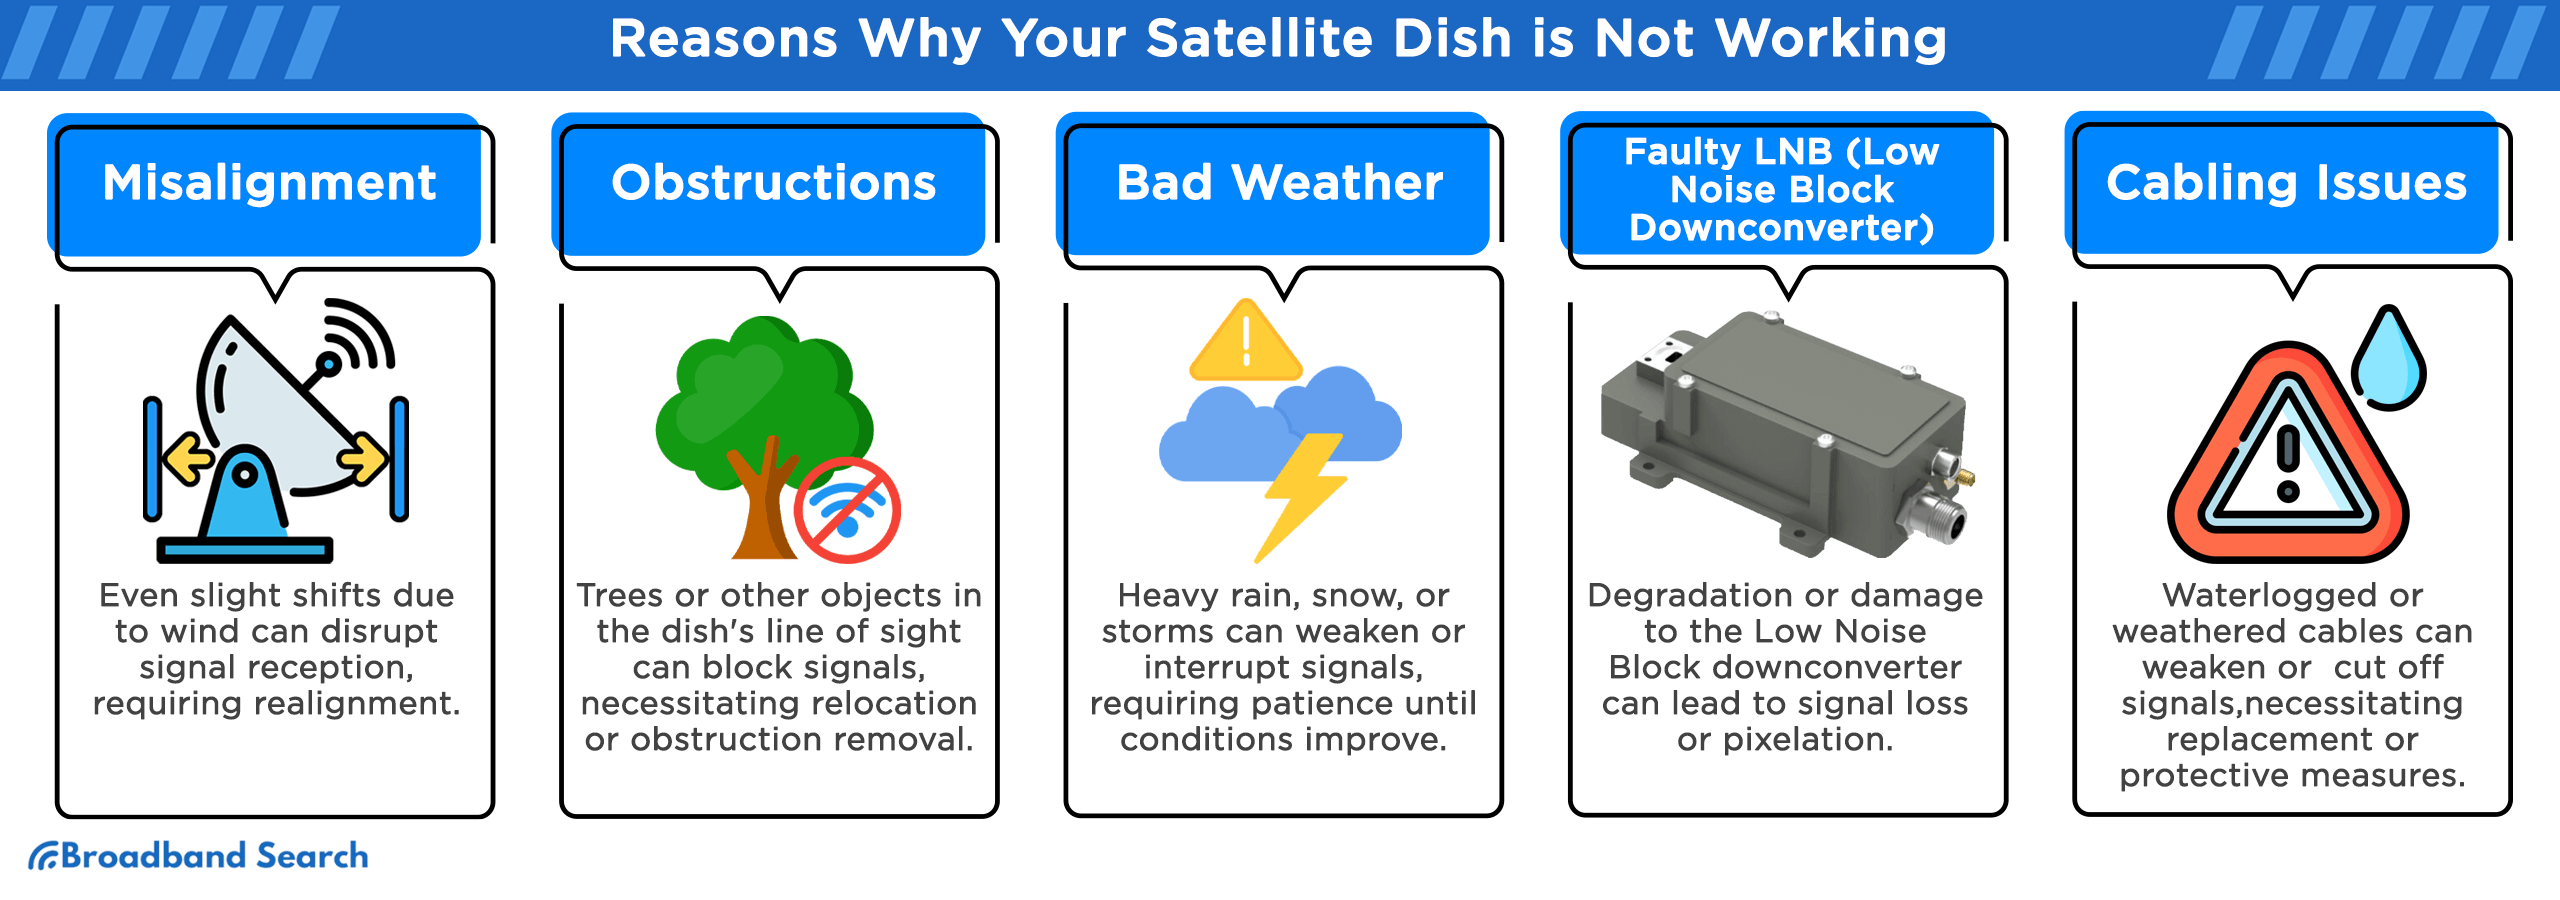 Reasons why your satellite dish is not working